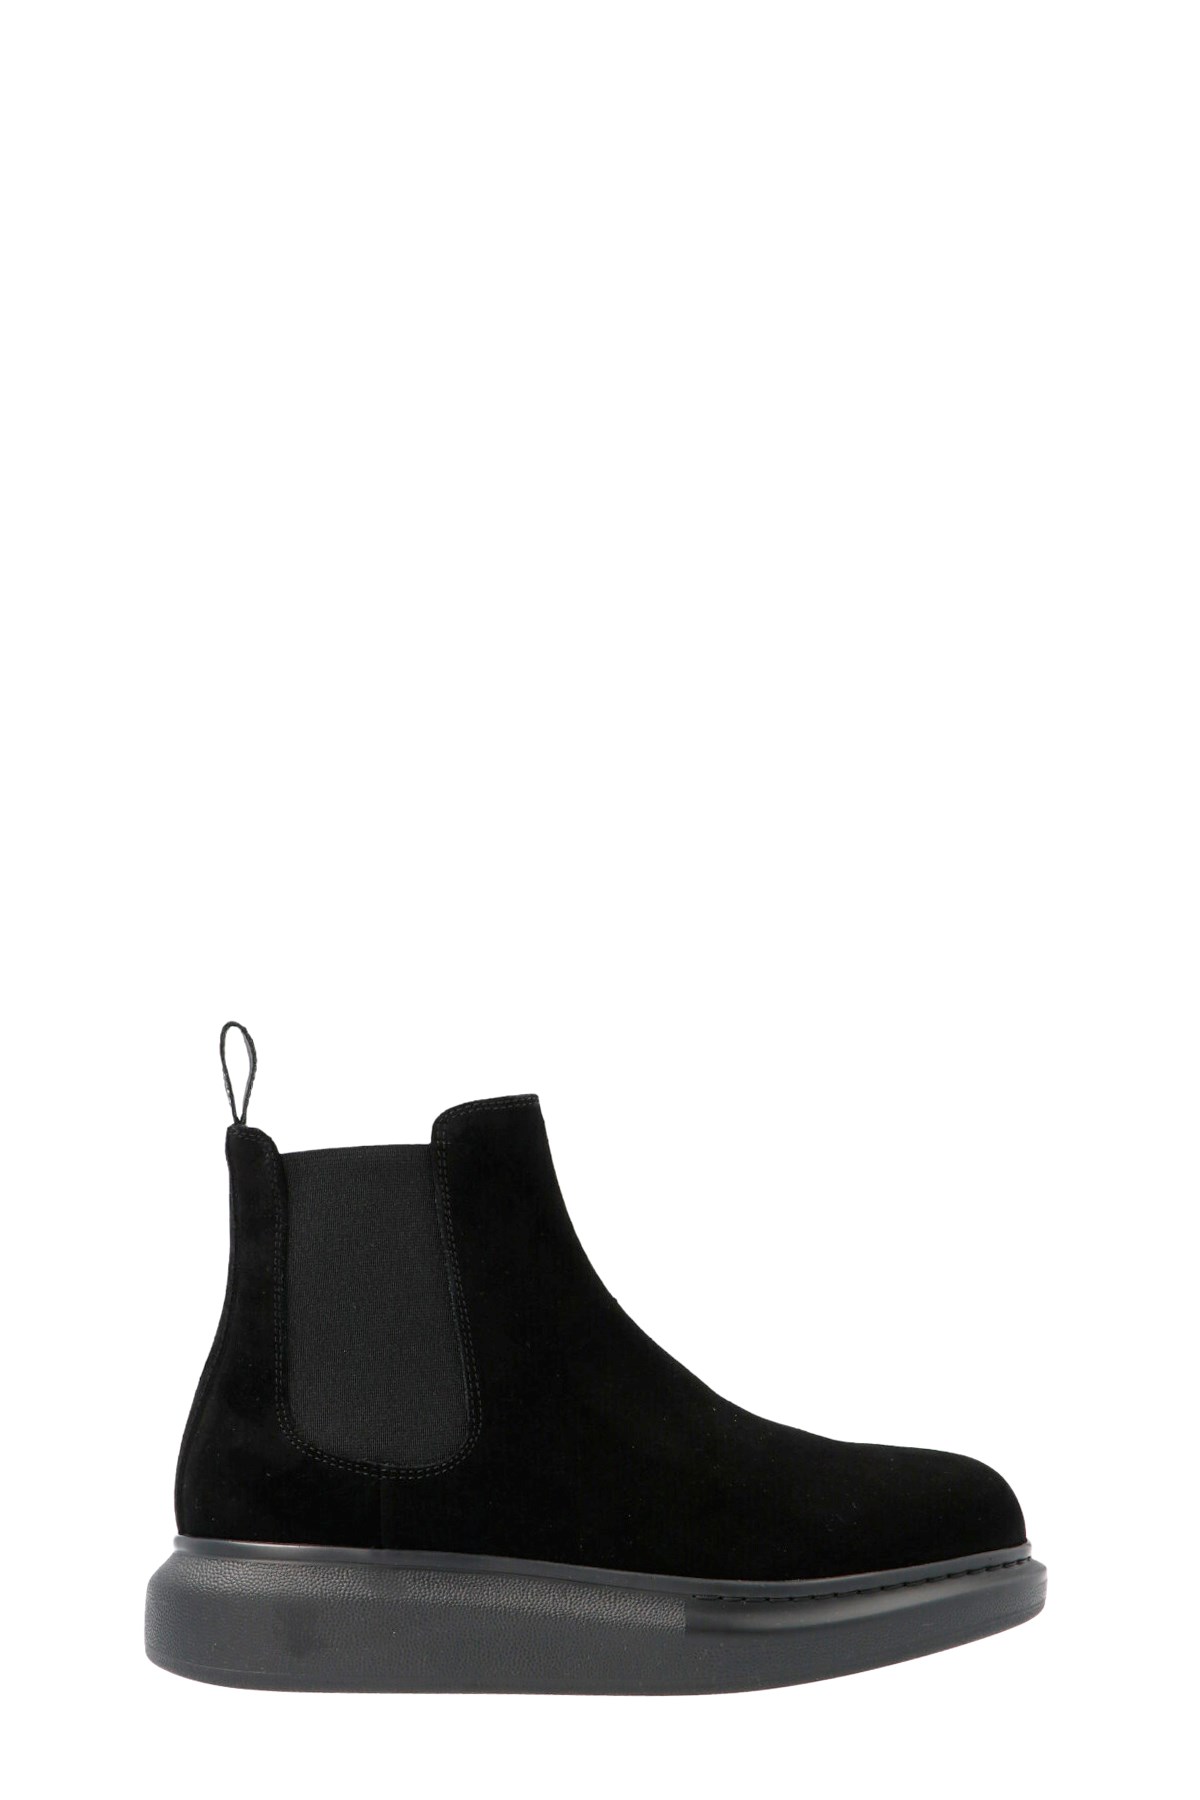 ALEXANDER MCQUEEN 'Chelsea Hybrid’ Ankle Boots